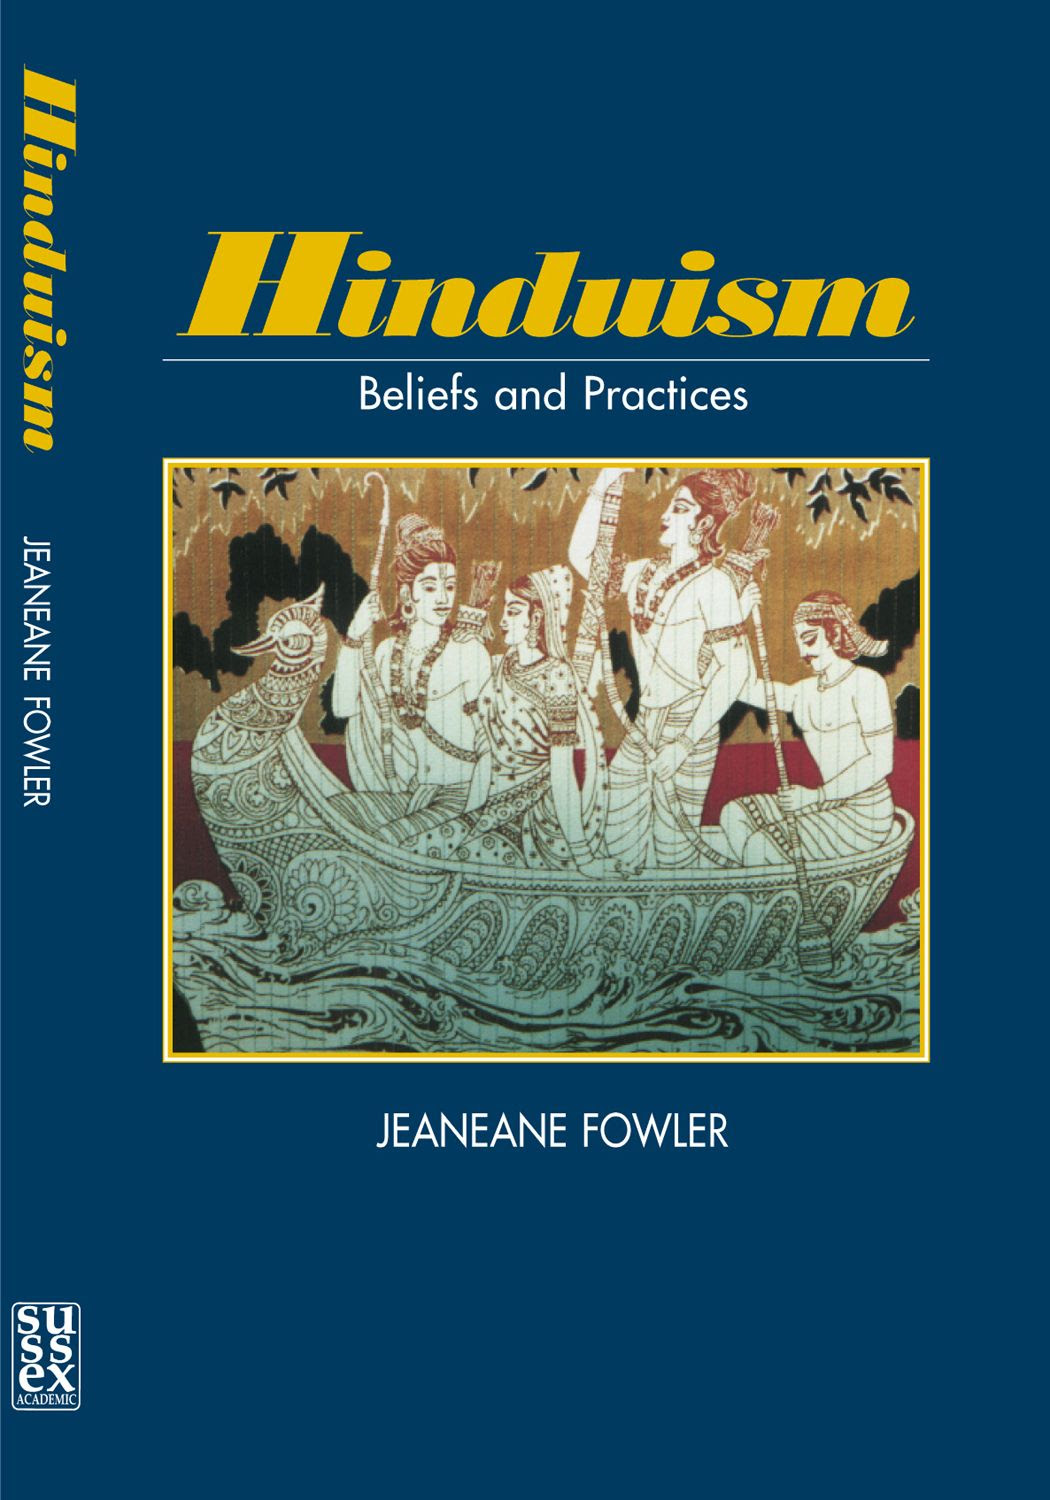 Hinduism: Beliefs and Practices PDF